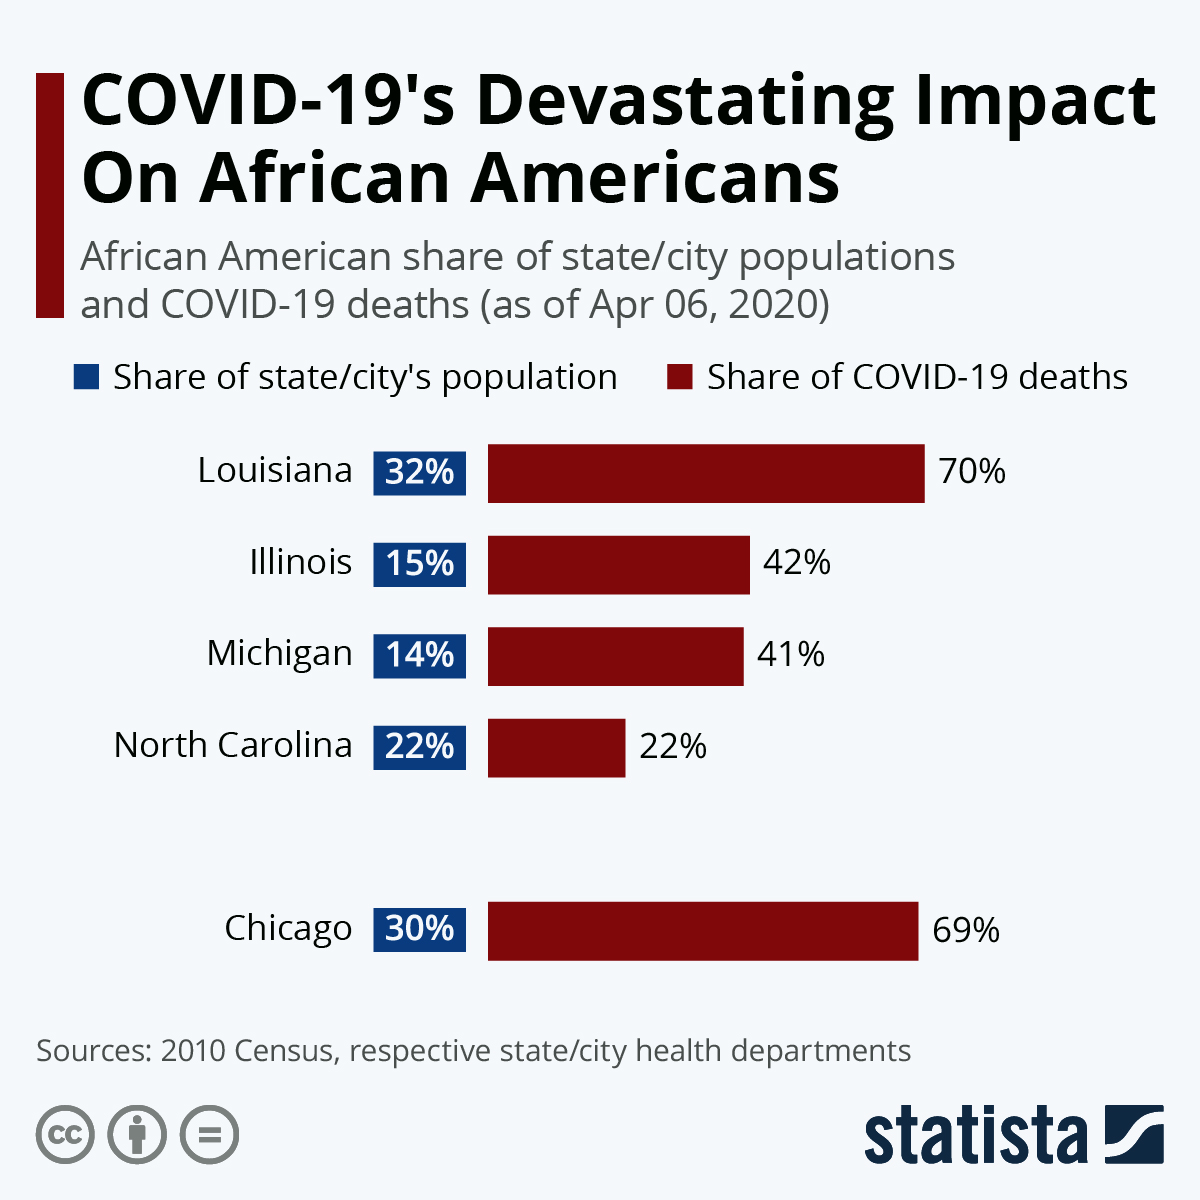 COVID-19's Impact On African Americans